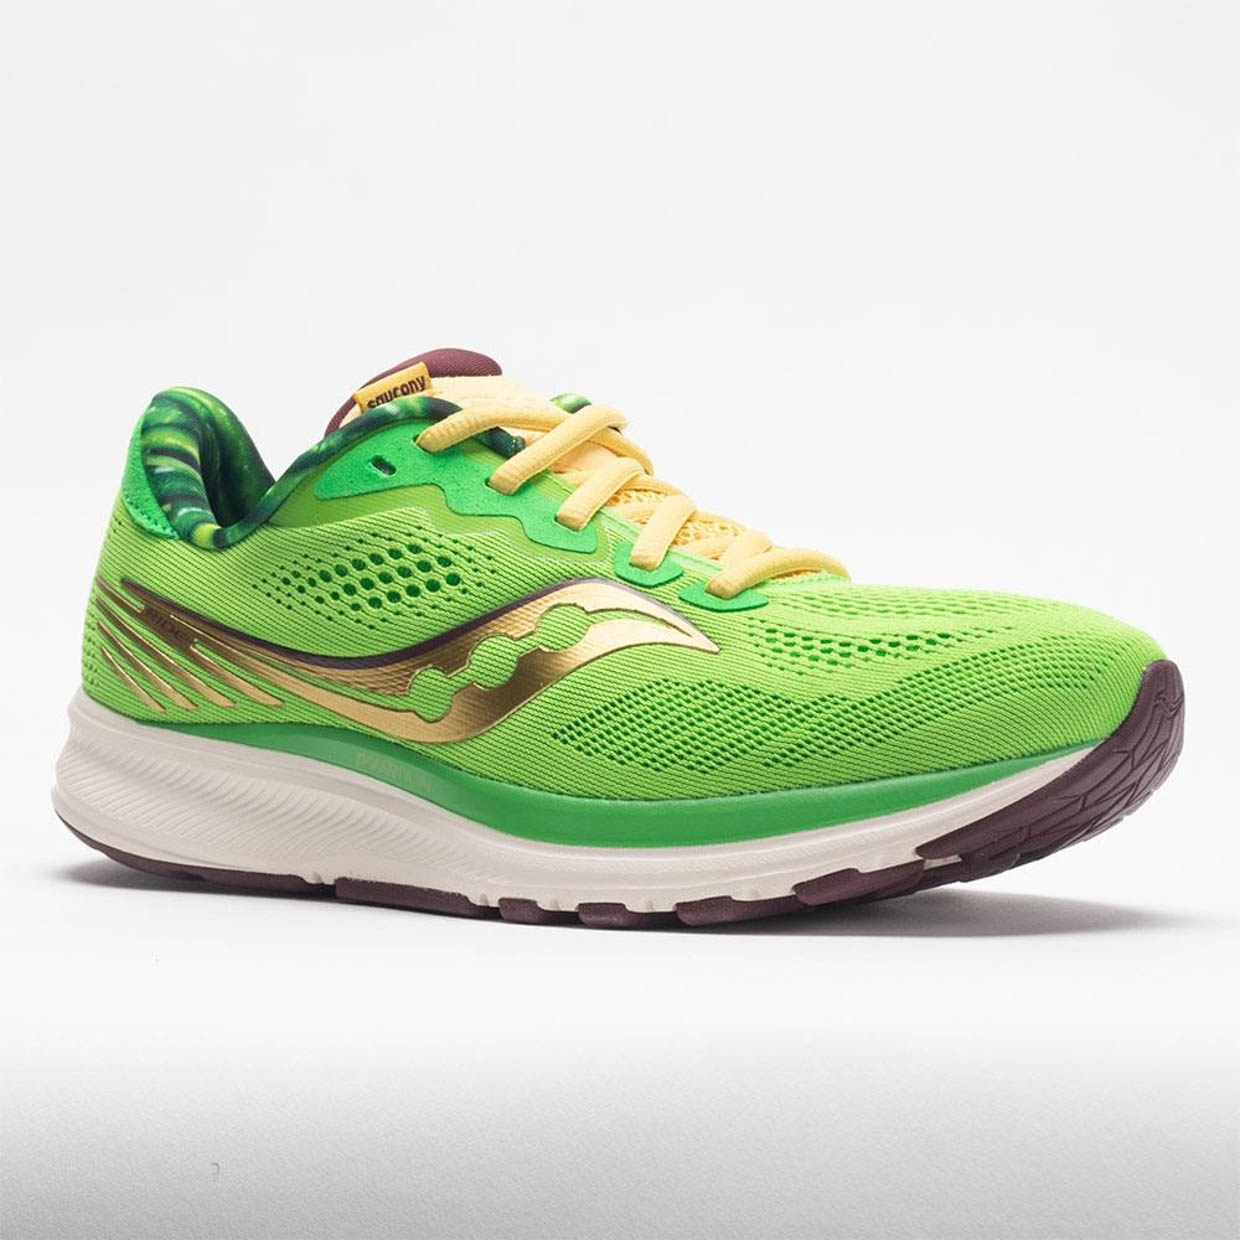 Saucony Ride 14 Pick-a-Side Running Shoes